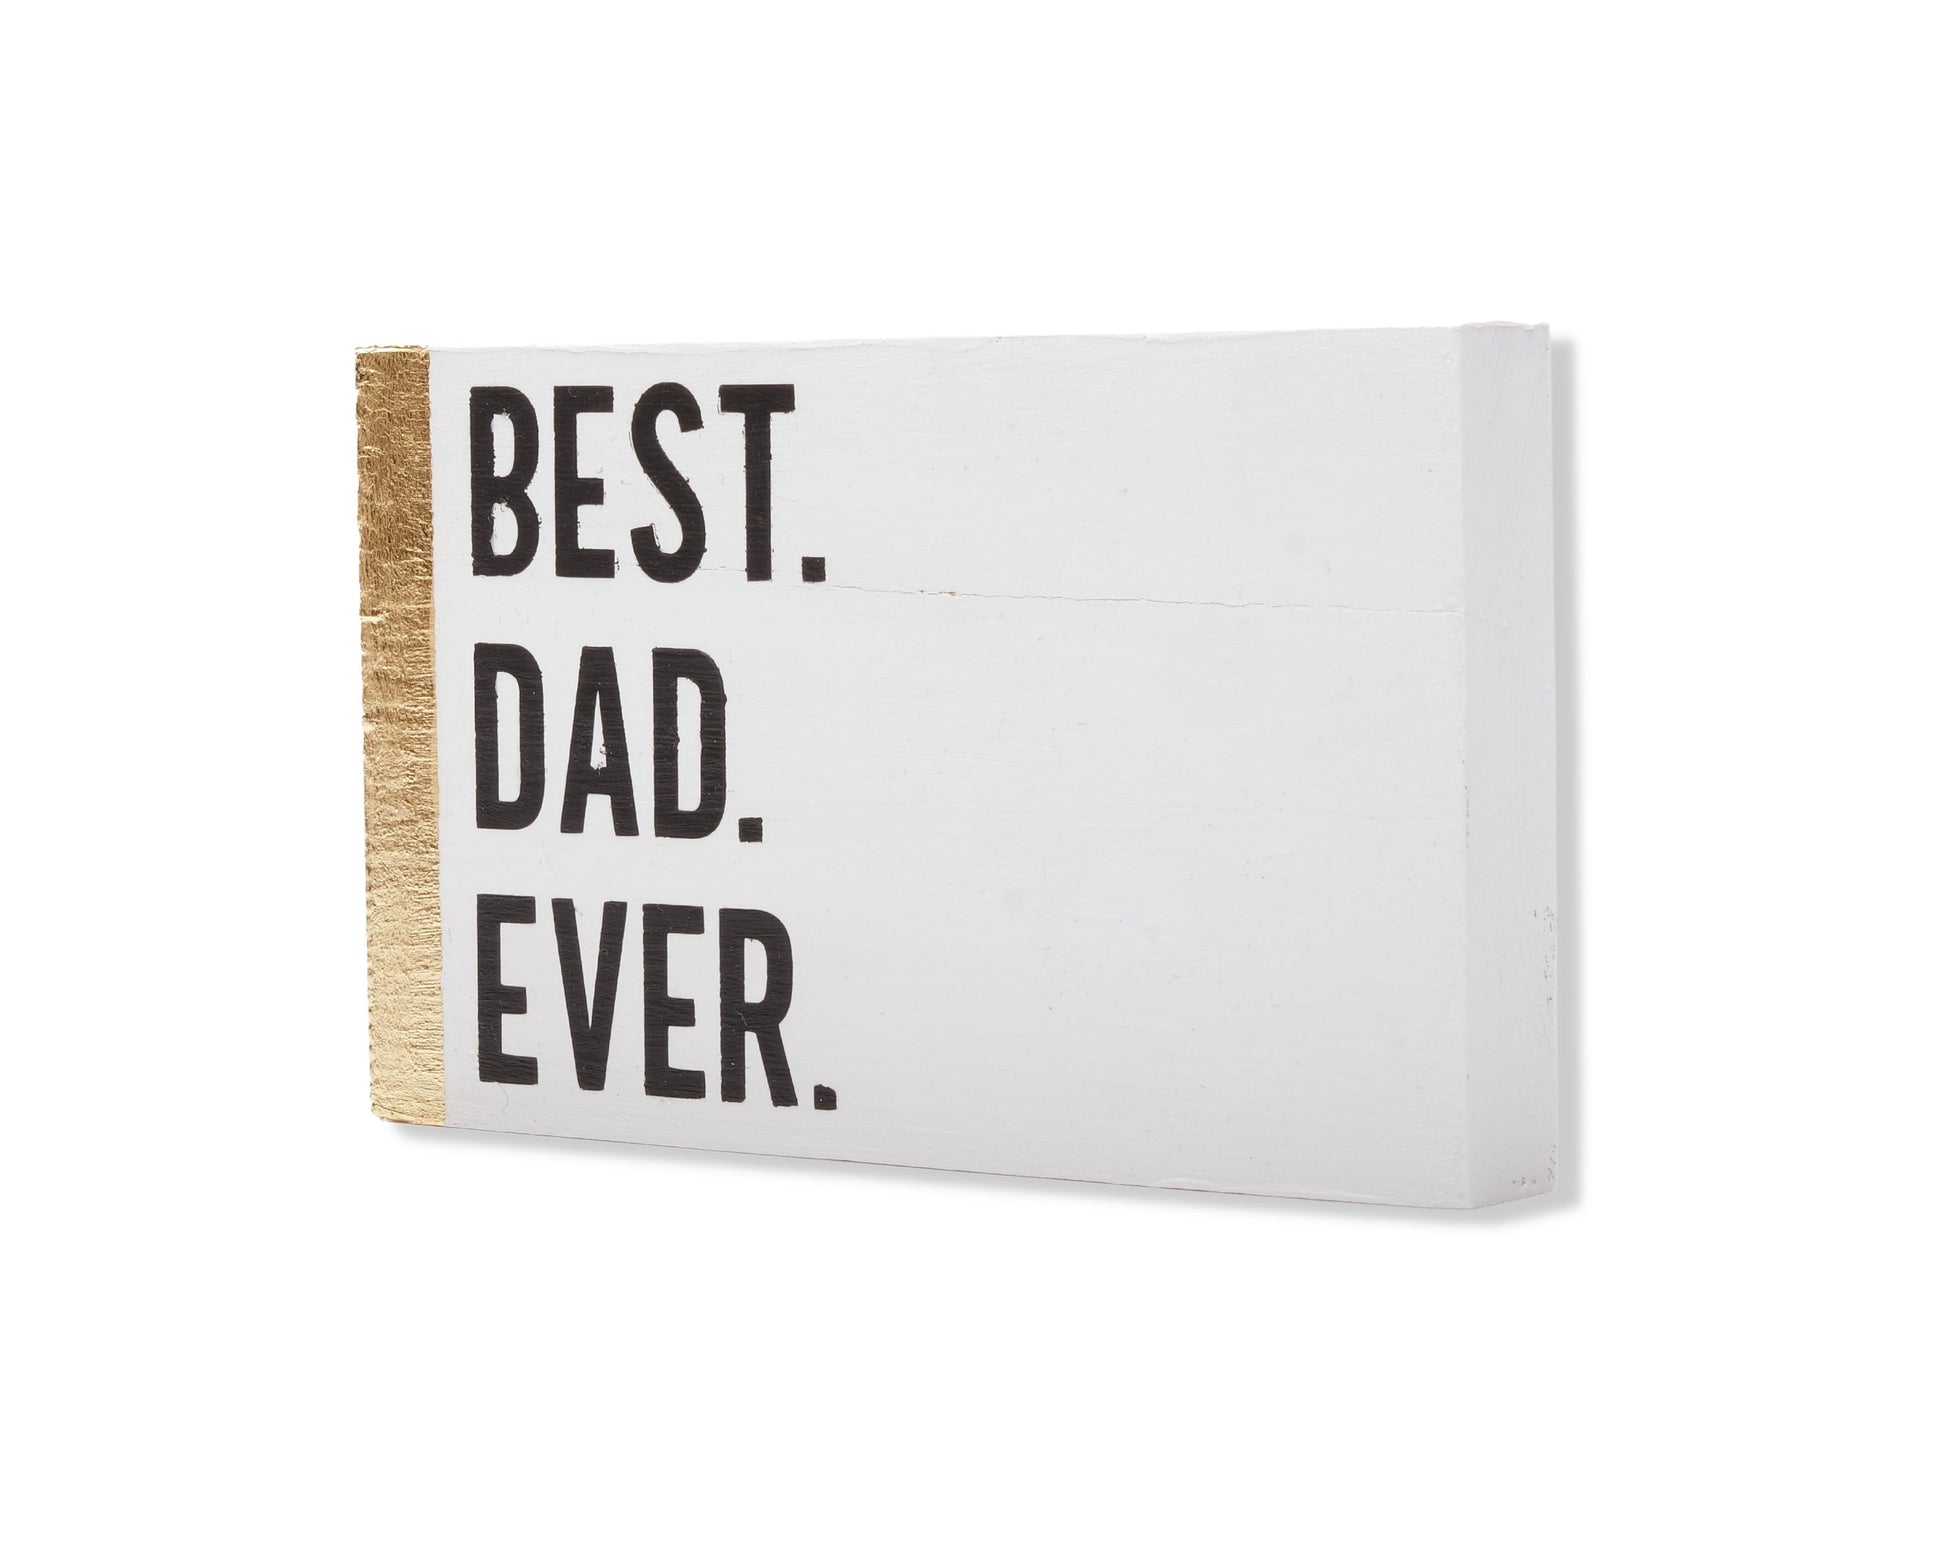 Best Dad Ever, Best Grandad Ever, personalized wood block sign, inspirational quote, Fathers Day, gift for him, grandfather gift, home decor